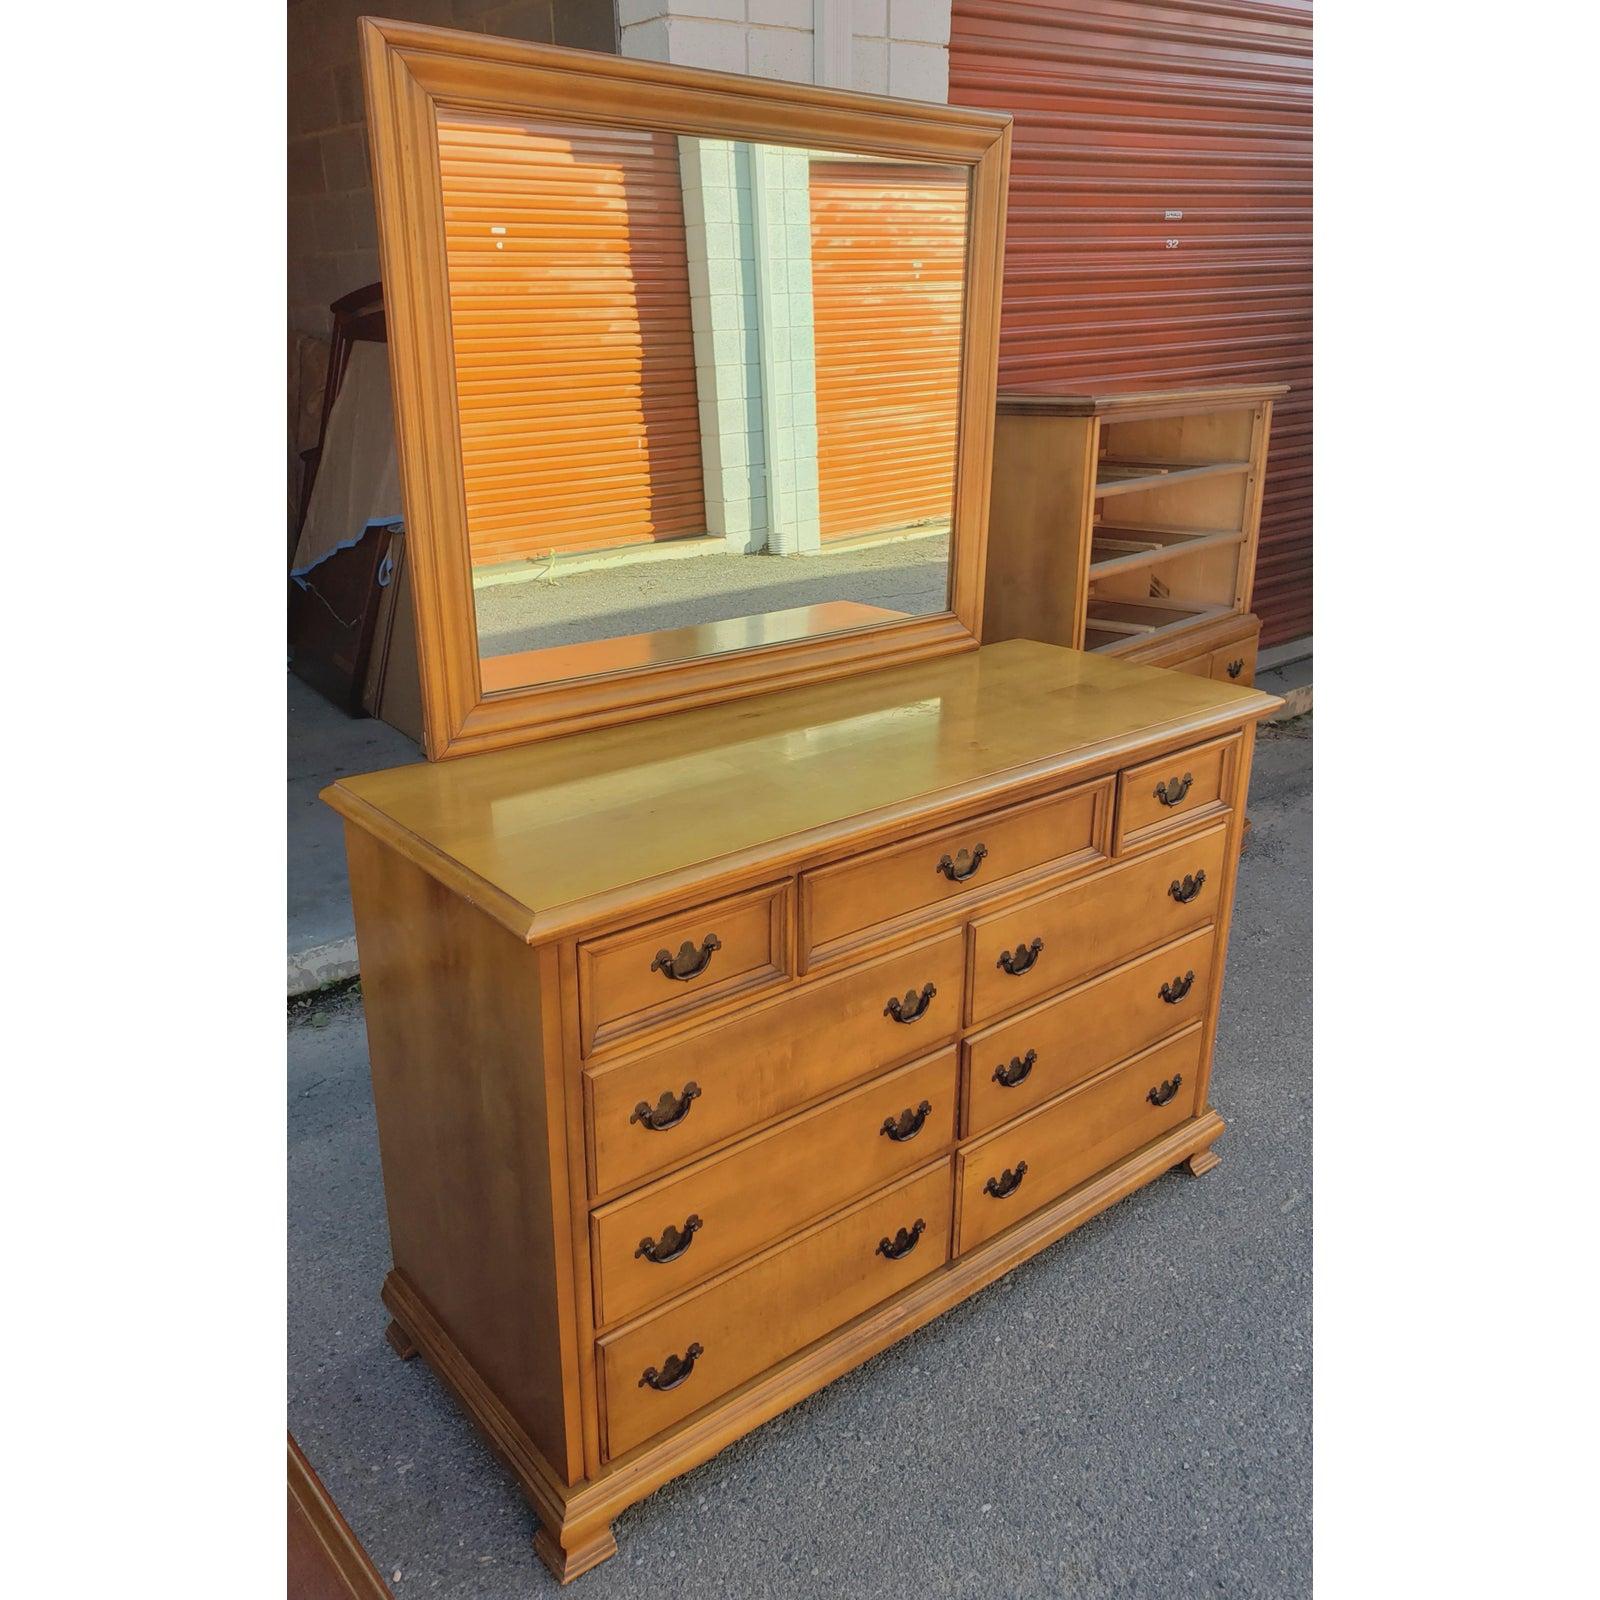 Mid-Century Modern solid maple double dresser with mirror from Cherokee Furniture.
 Dresser measures, 53”w x 20 1/2d x 34”h.
 Mirror measures, 42”w x 33”h.

All dovetail drawers work as originally intended. Very Solid Construction.
We have a